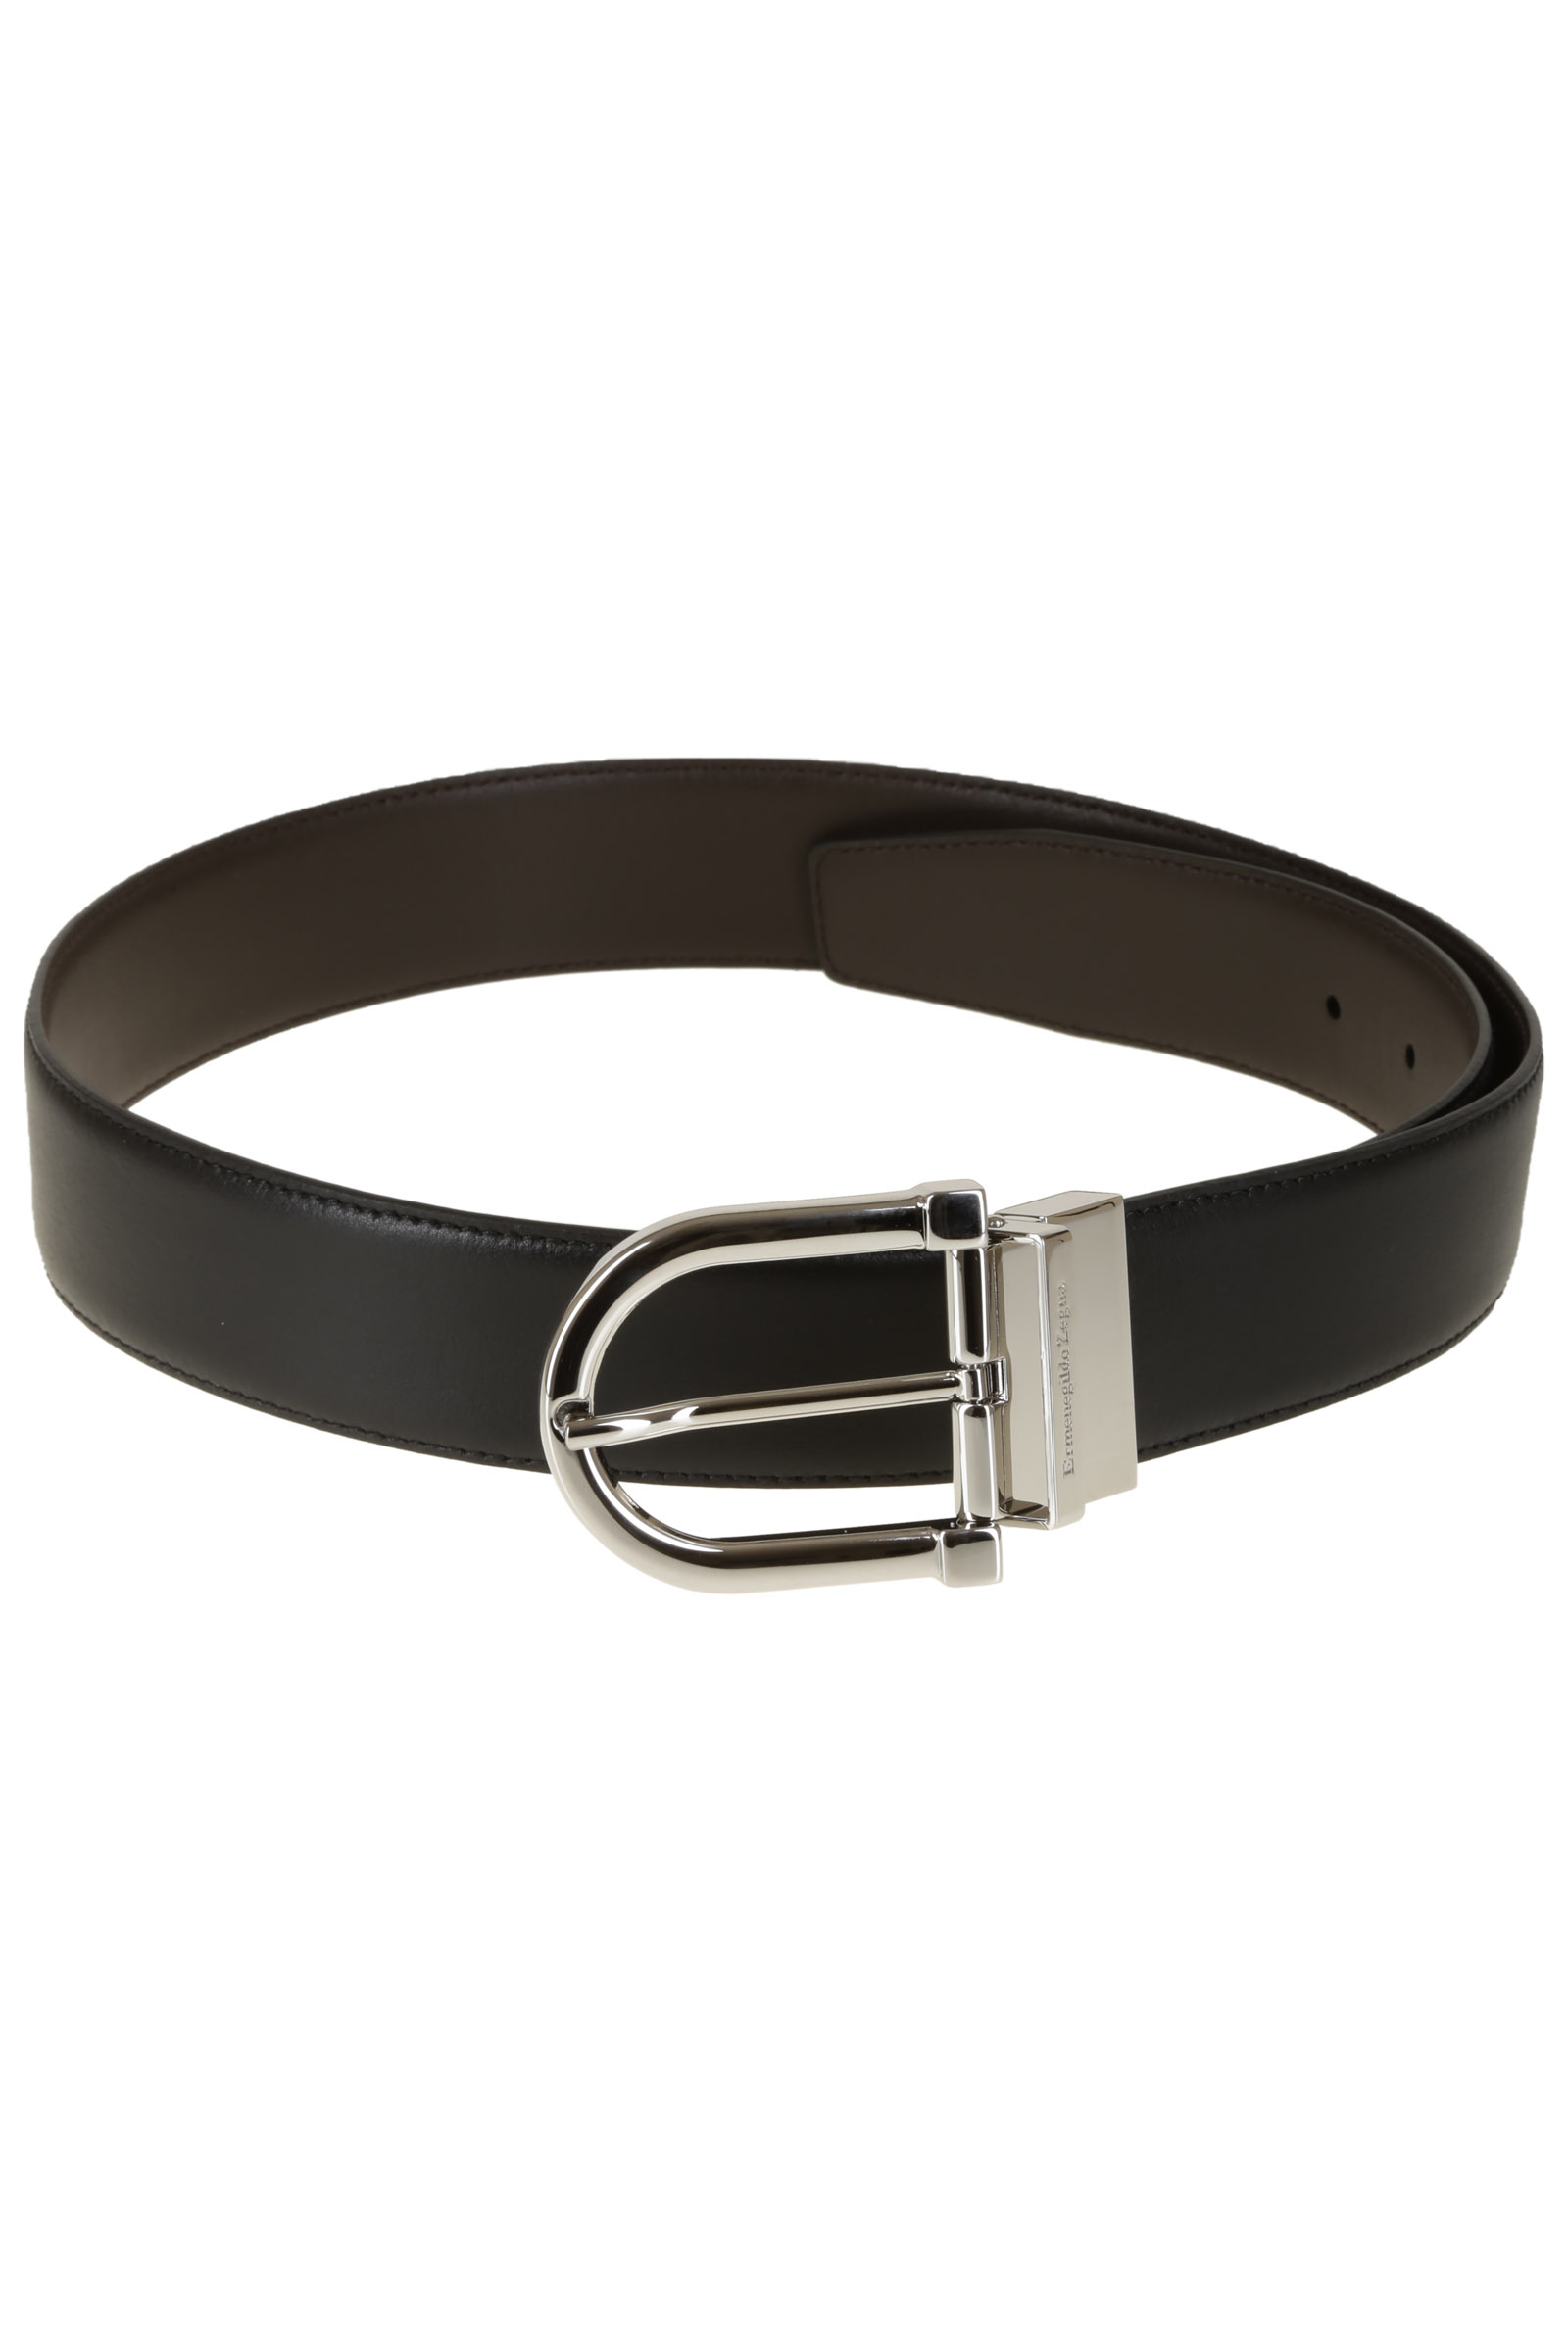 Picture of Zegna | Belt